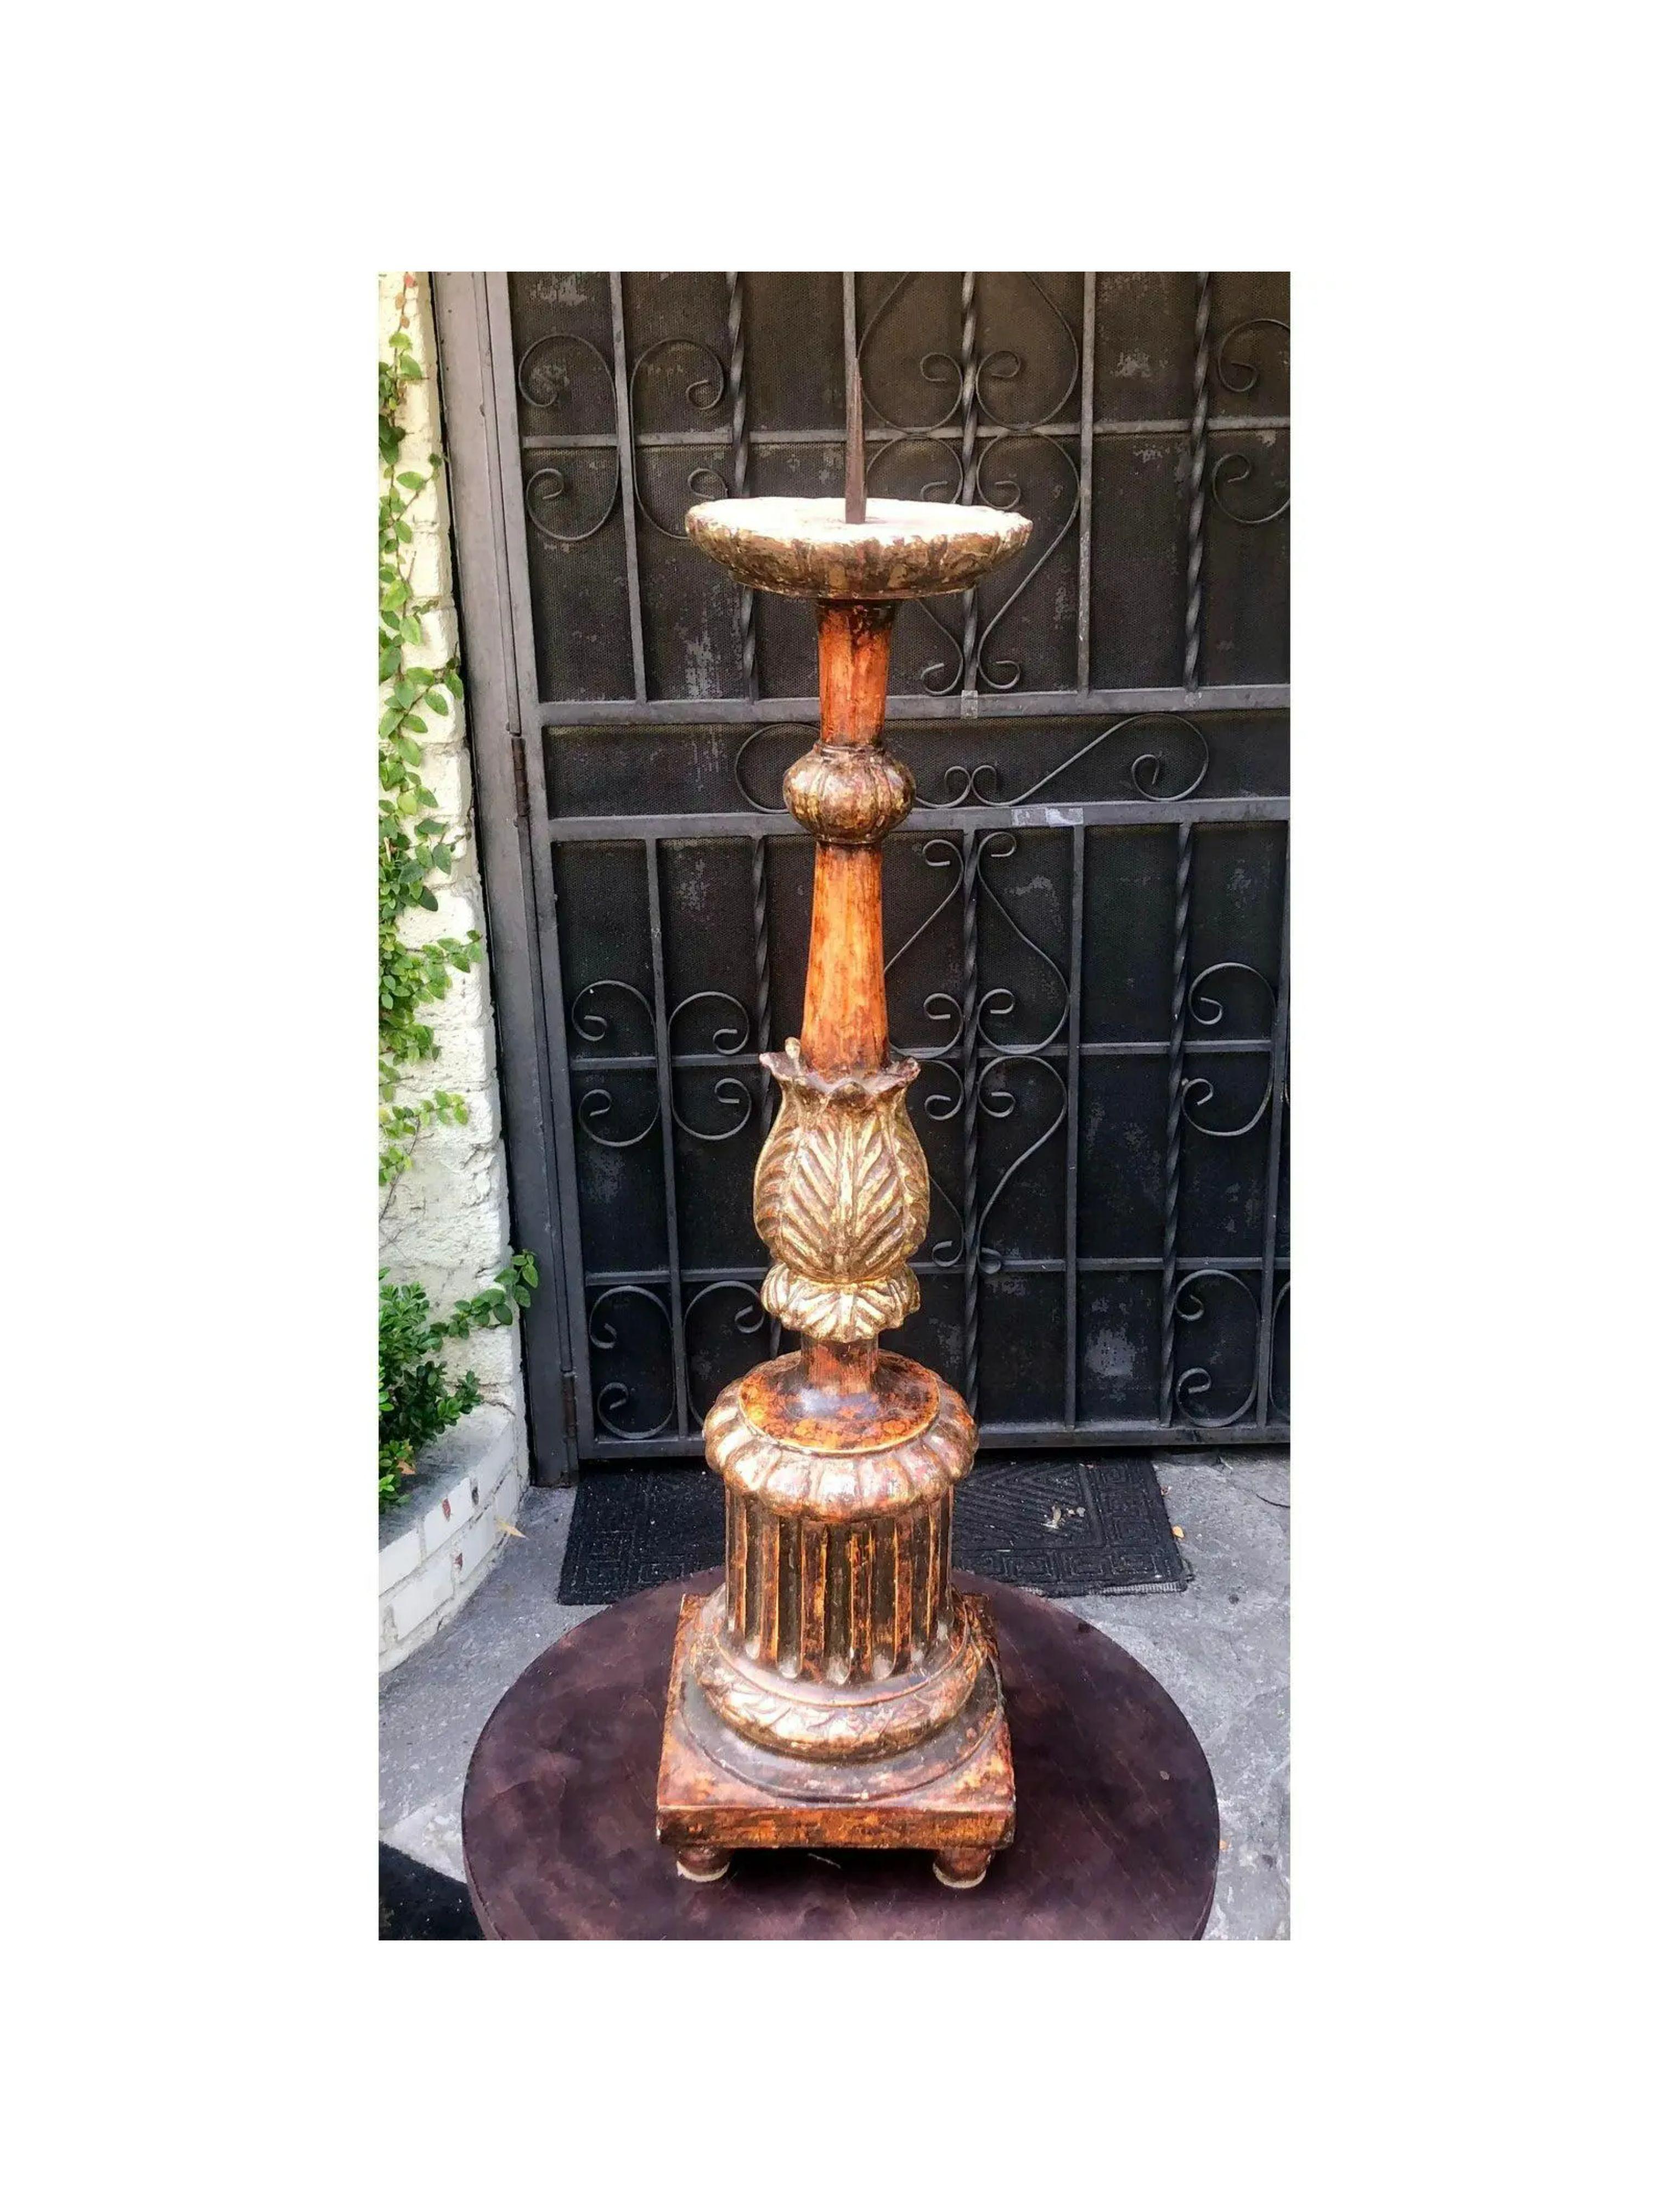 Unusual Antique 18th century Italian polychrome & giltwood Alter candlestick

Additional information: 
Materials: giltwood, Polychrome
Color: Orange
Period: 18th century
Place of Origin: Italy
Styles: Italian
Item Type: Vintage, Antique or